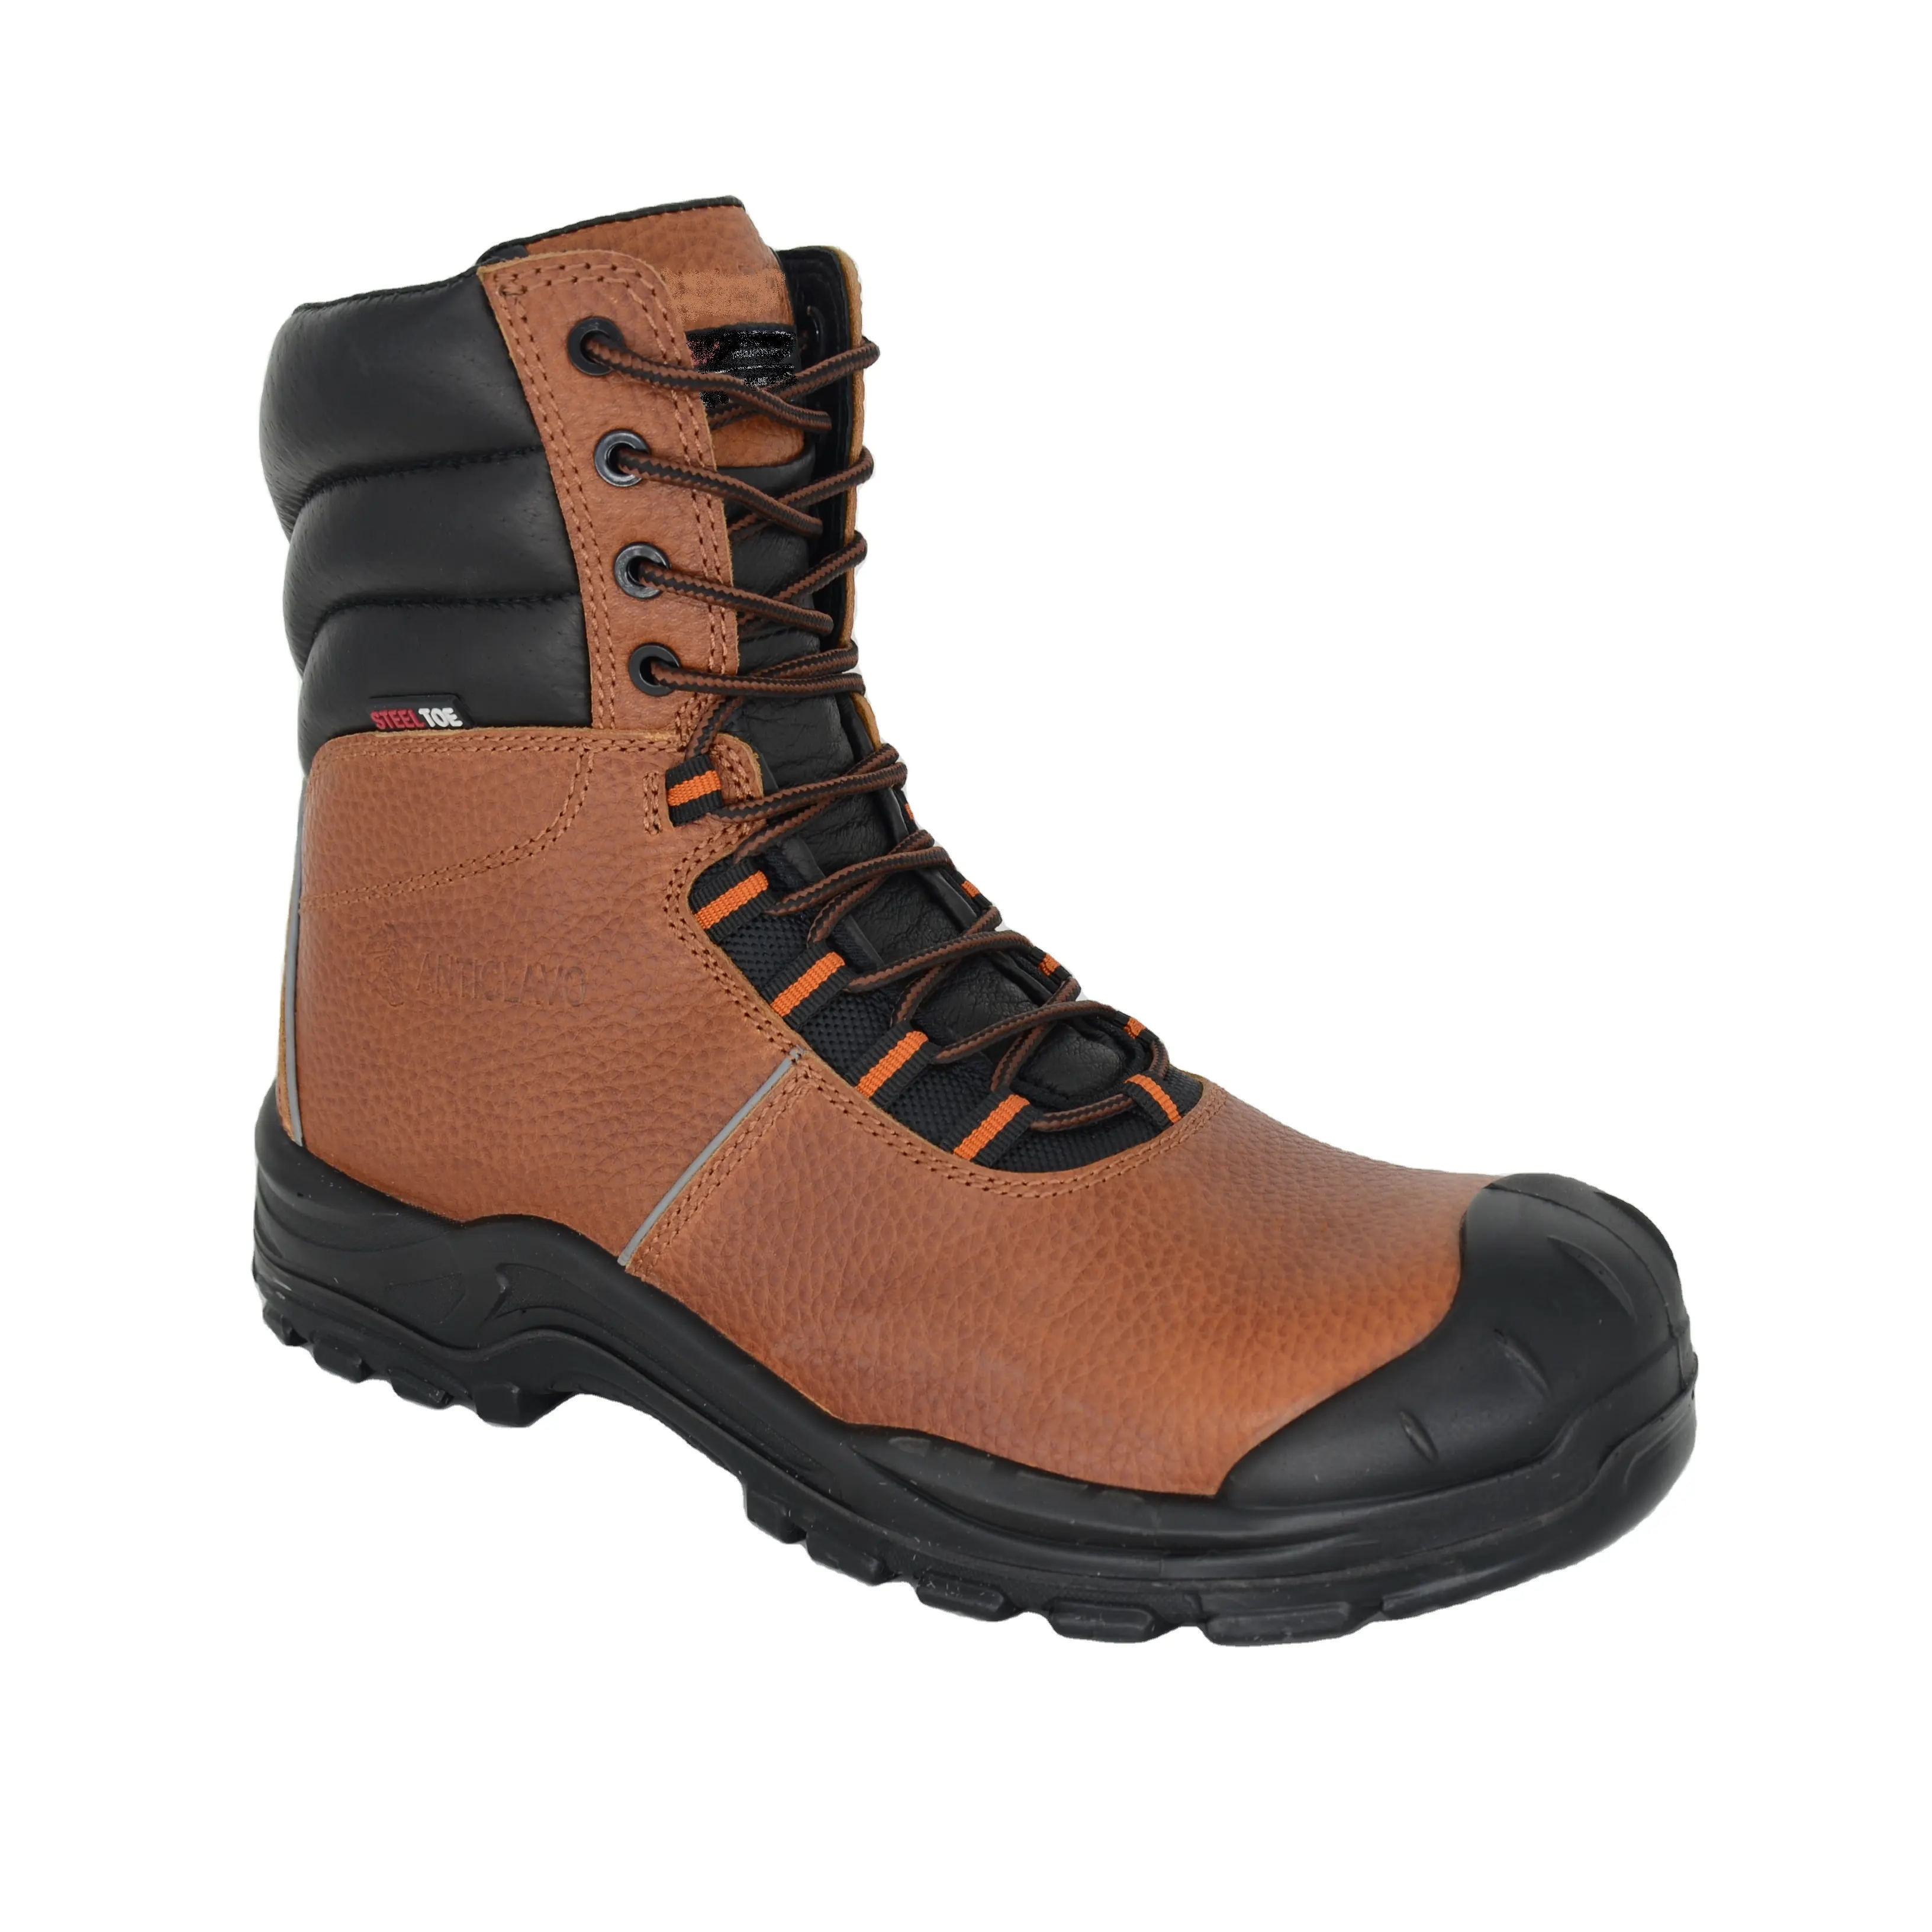 2021 safety shoes steel toe new boots zapatos de seguridad men work protect safety shoes boots